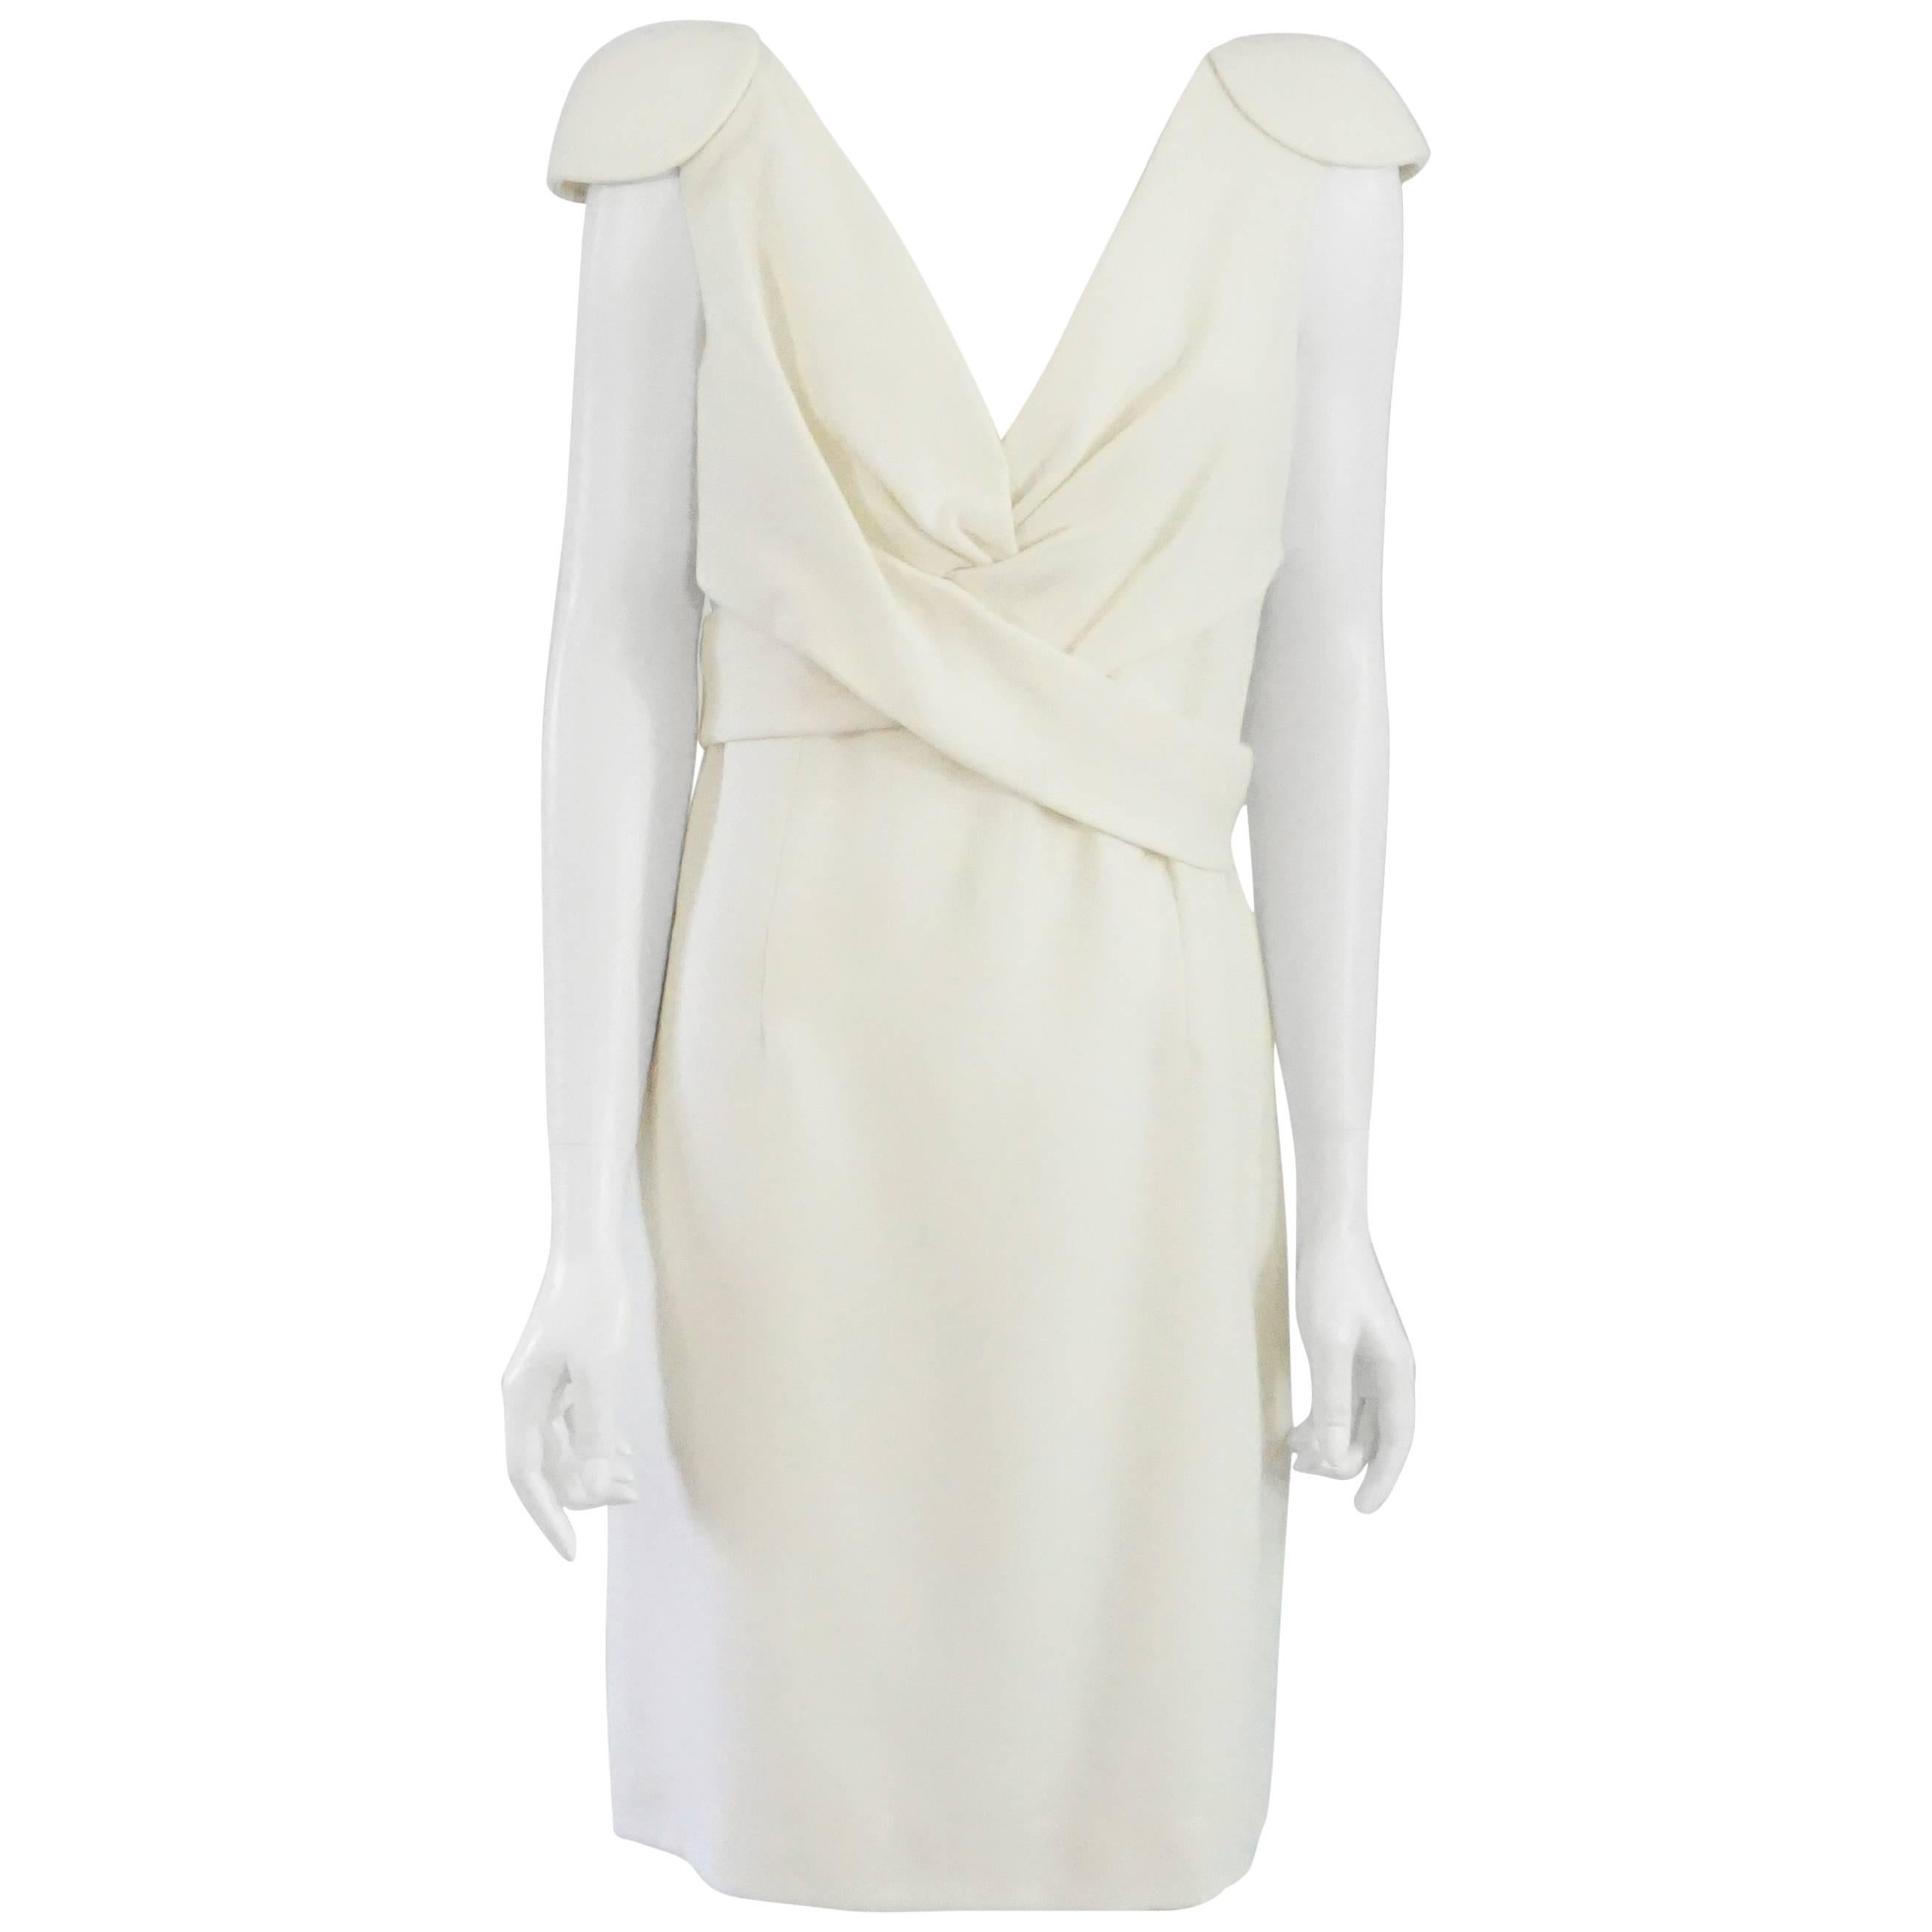 Alexander McQueen Ivory Wool Dress with Crossed Front Design - 46